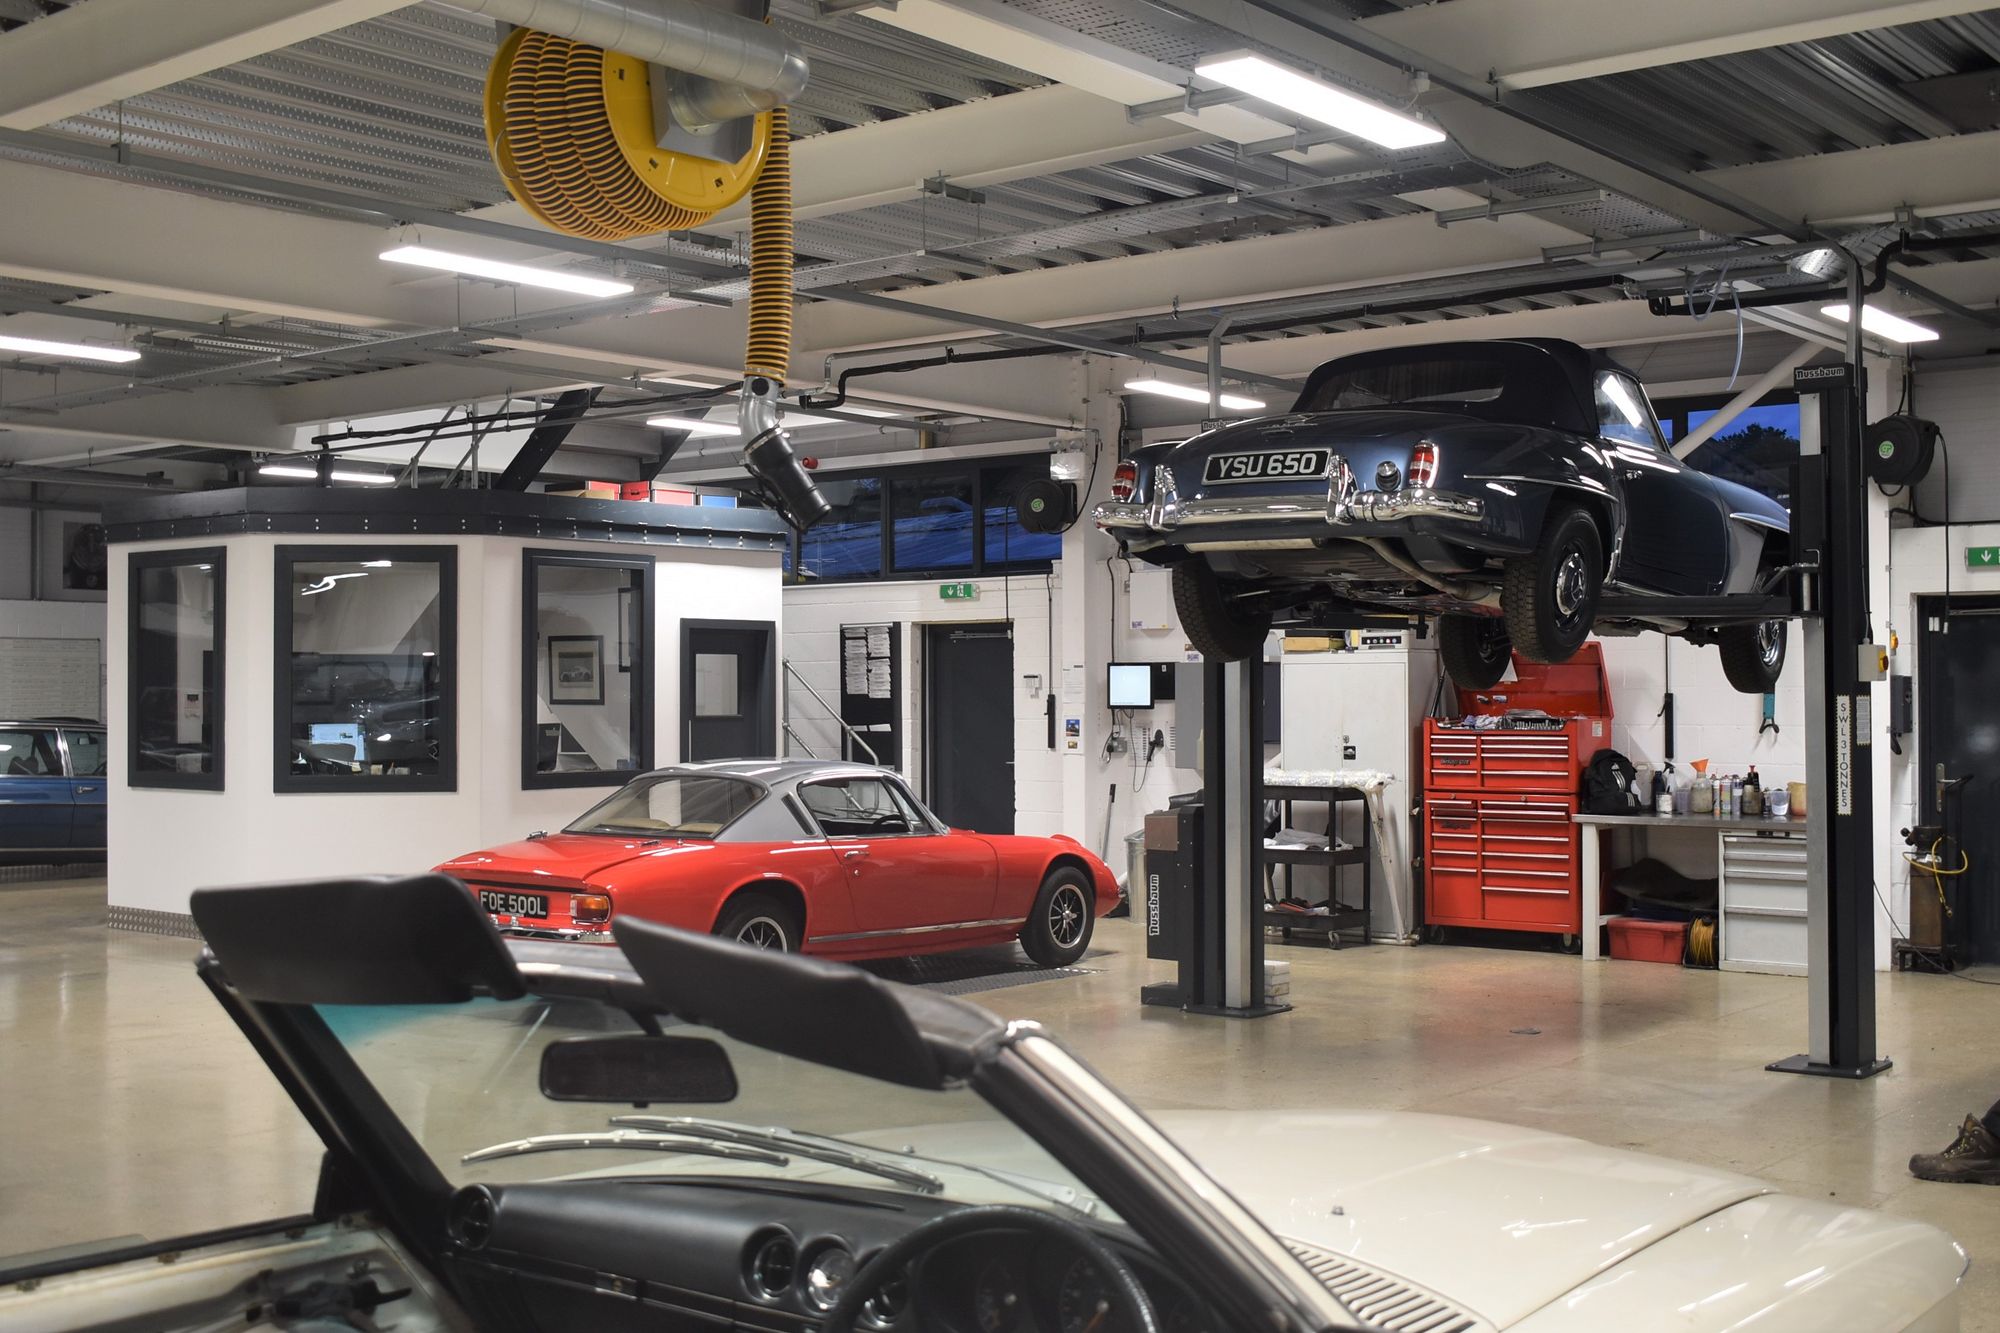 The Mercedes-Benz Owners Club visit our new workshop!